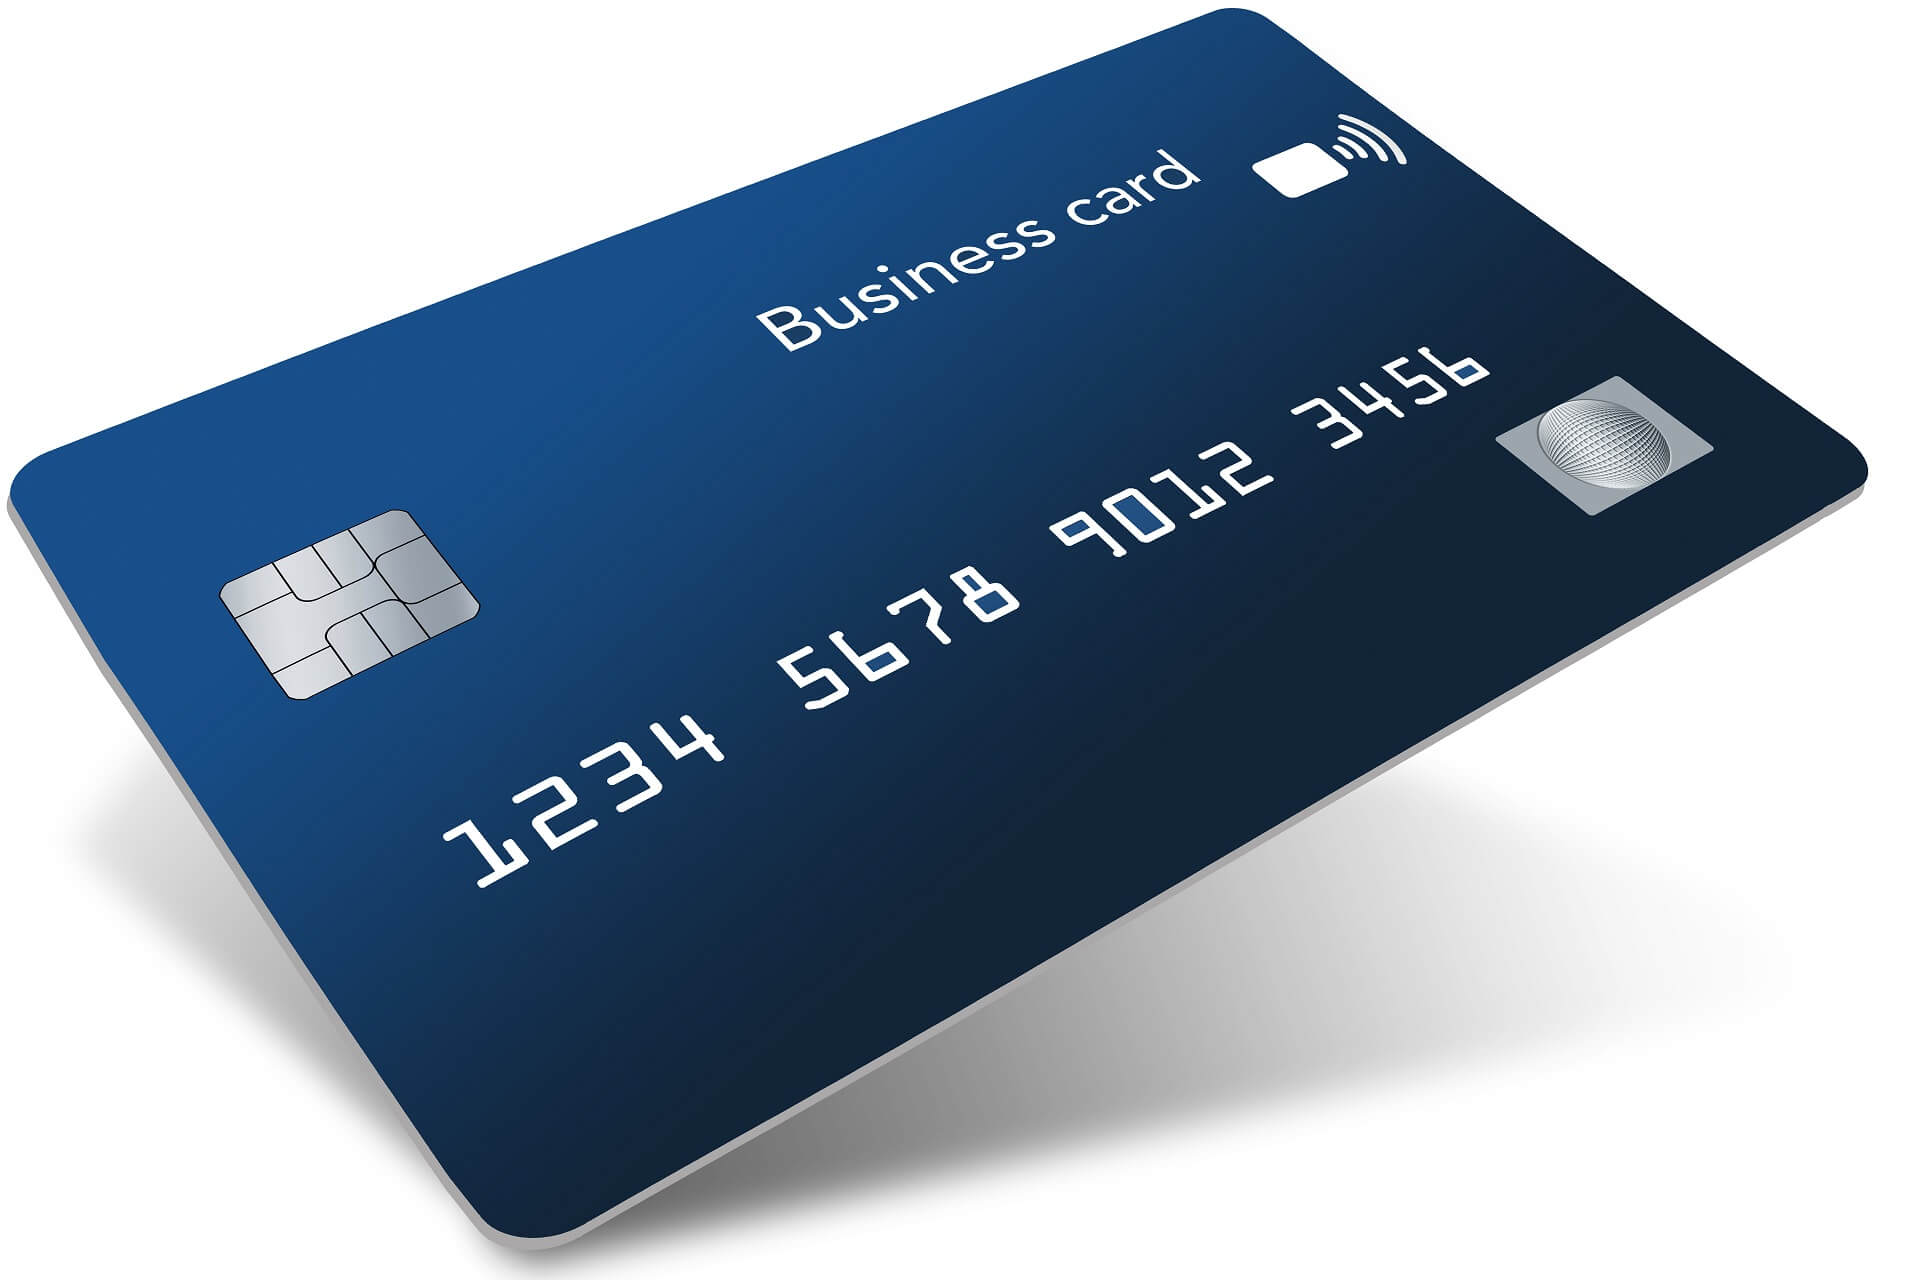 How to Get Free Virtual Credit/Debit Cards in India